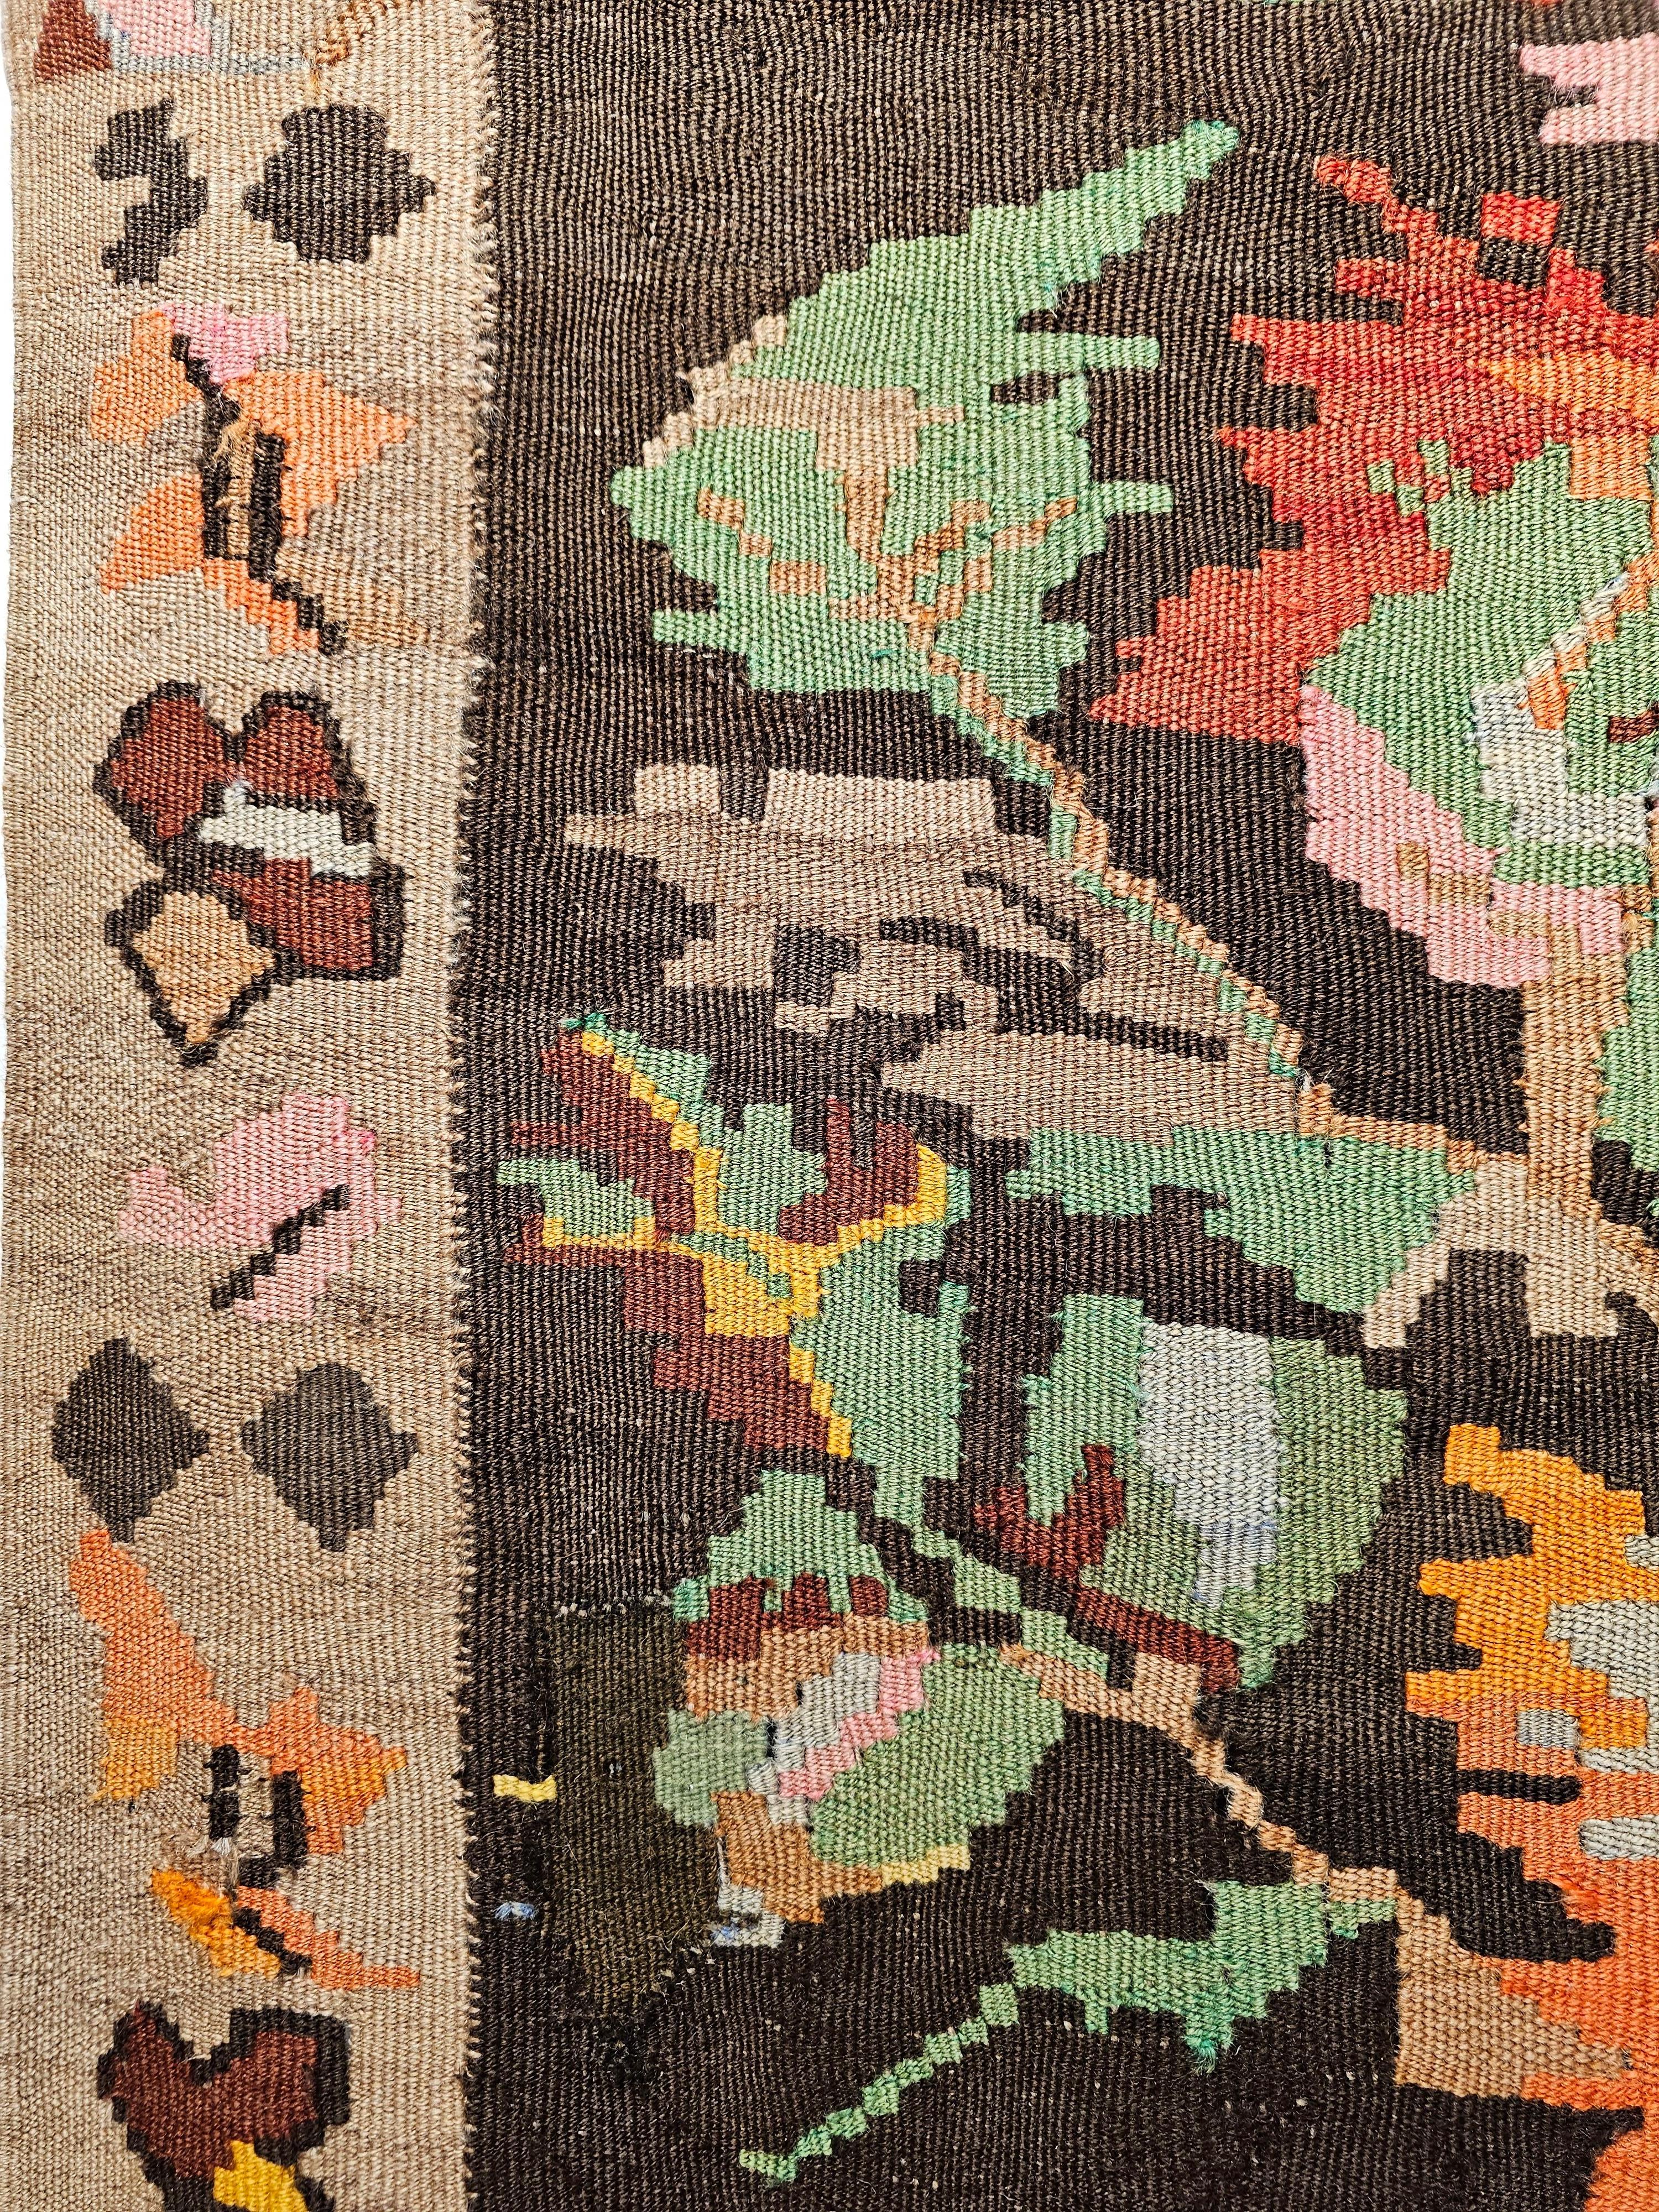 Vintage Karabagh Kilim Runner with Large Floral Designs and Vibrant Colors In Good Condition For Sale In Barrington, IL